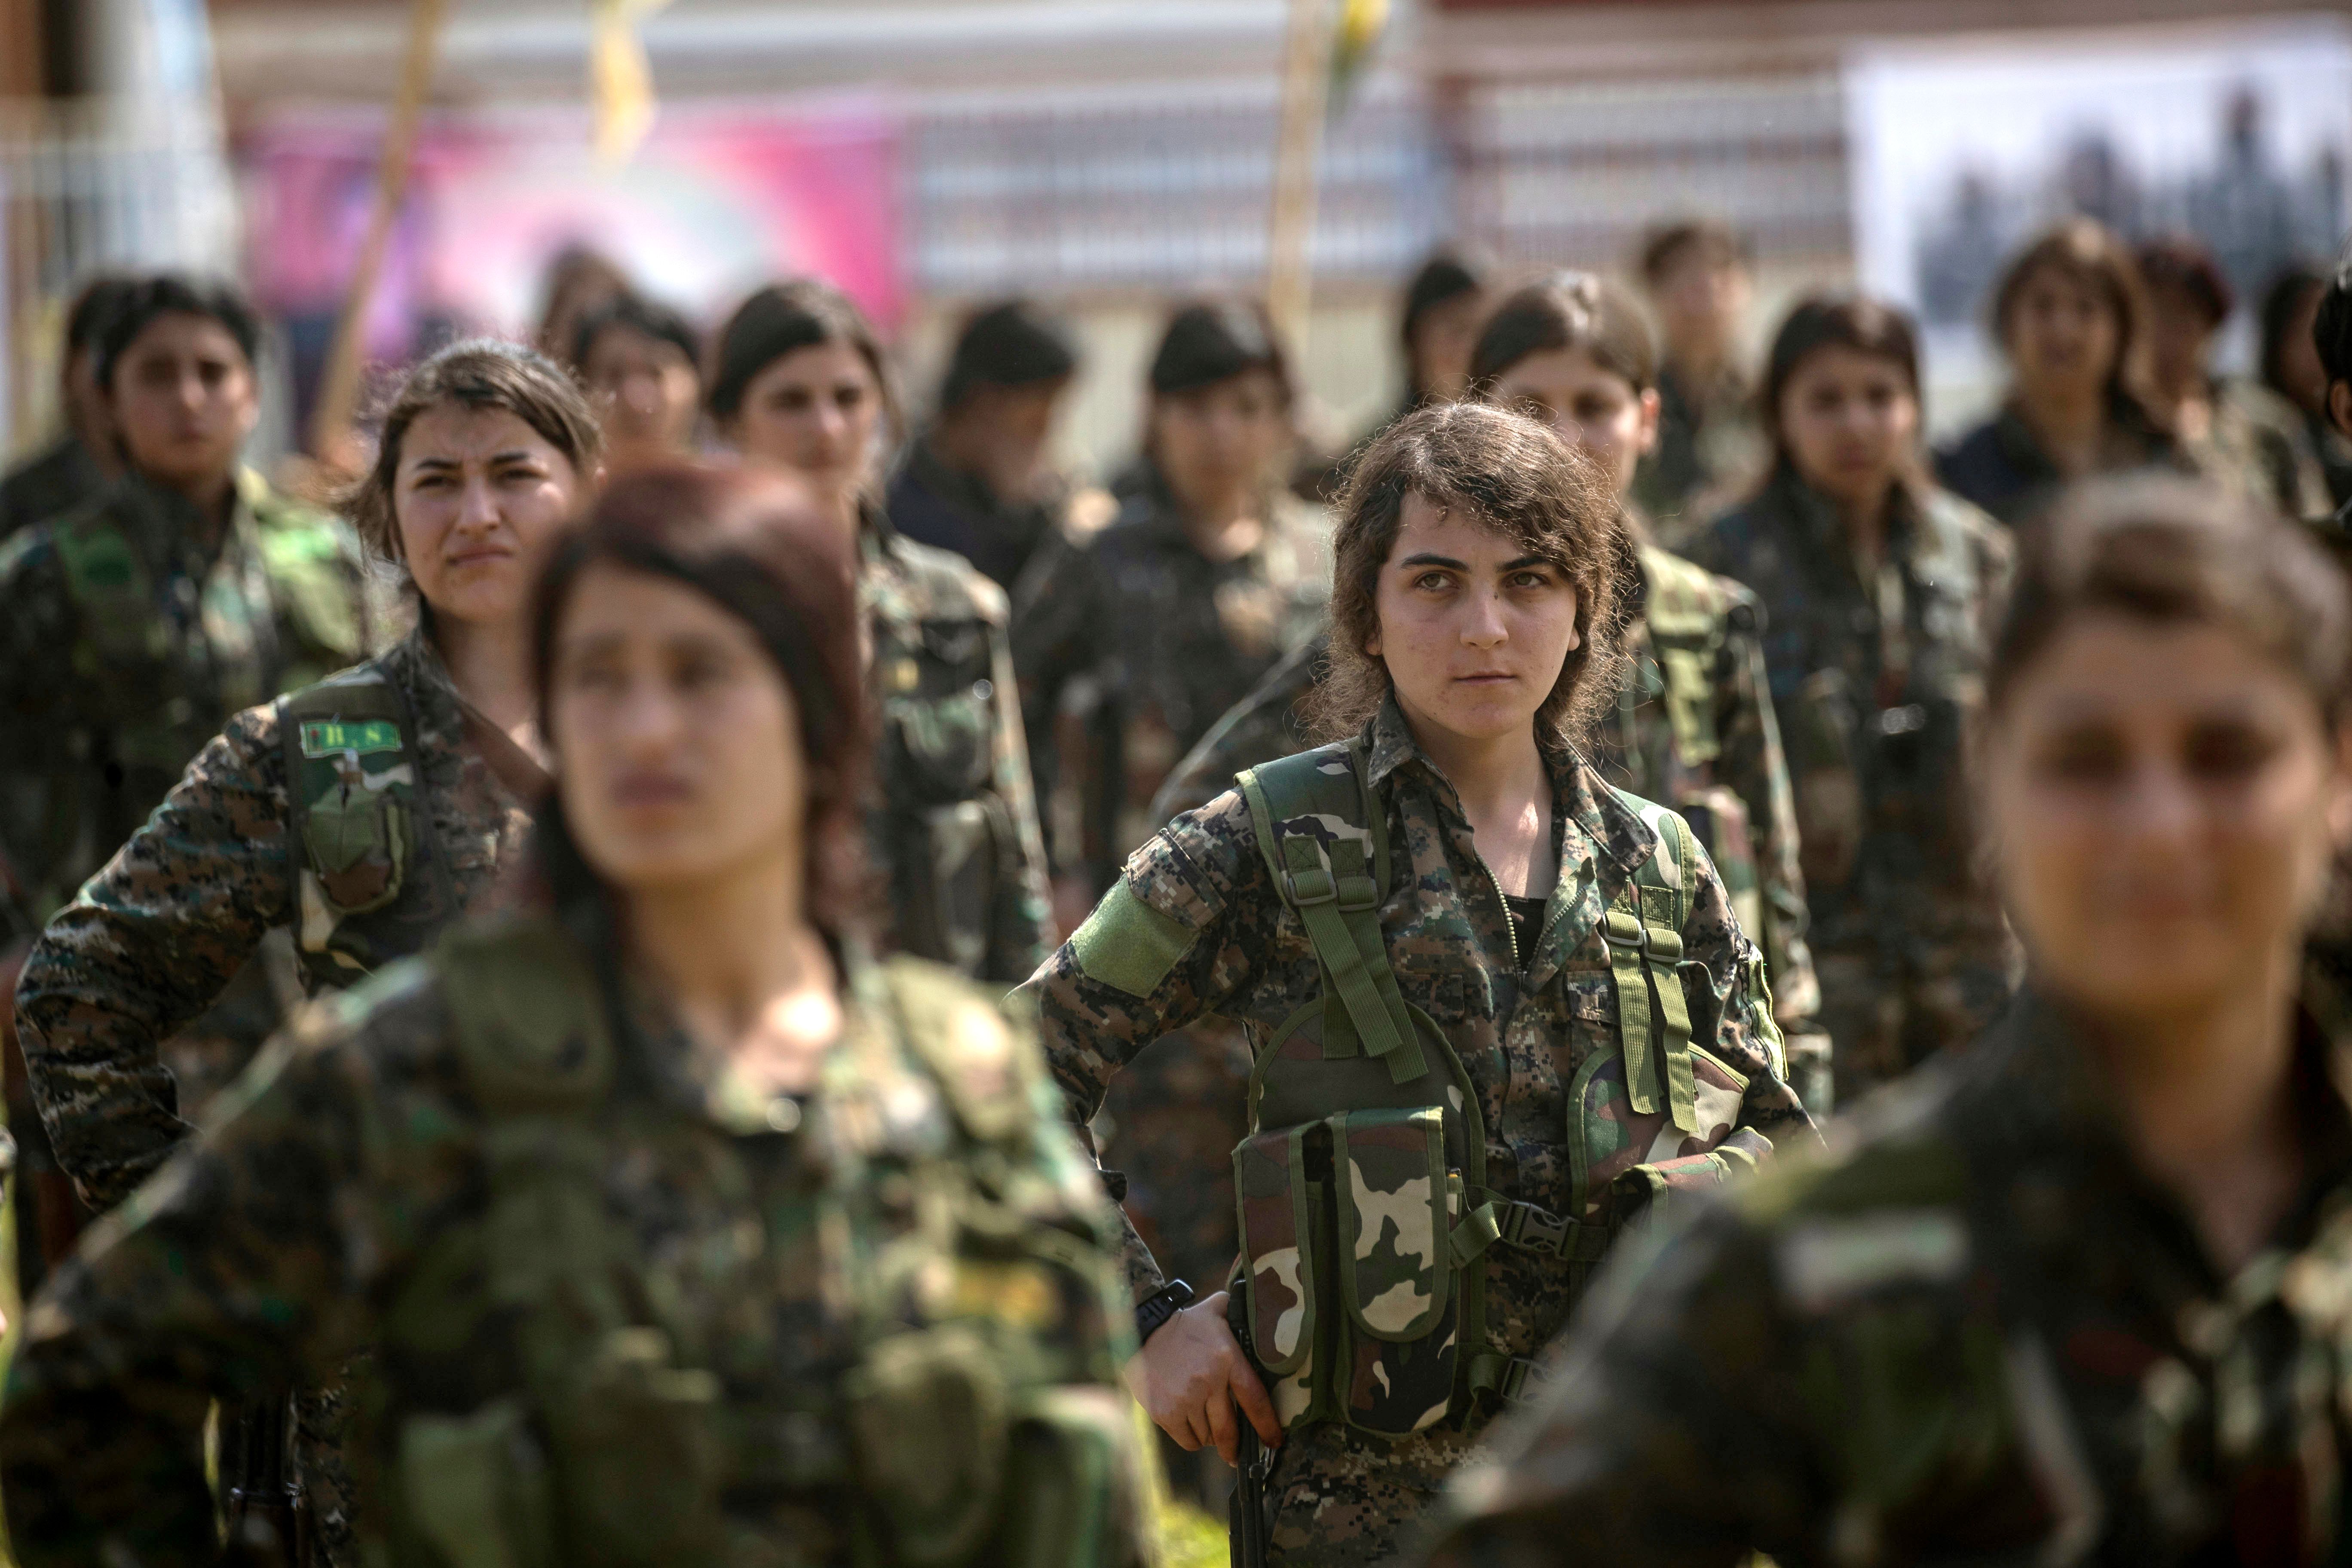 Indian Army Girl Sex - Kurdish Women Fighters Answer the Call of Duty â€“ SAPIENS